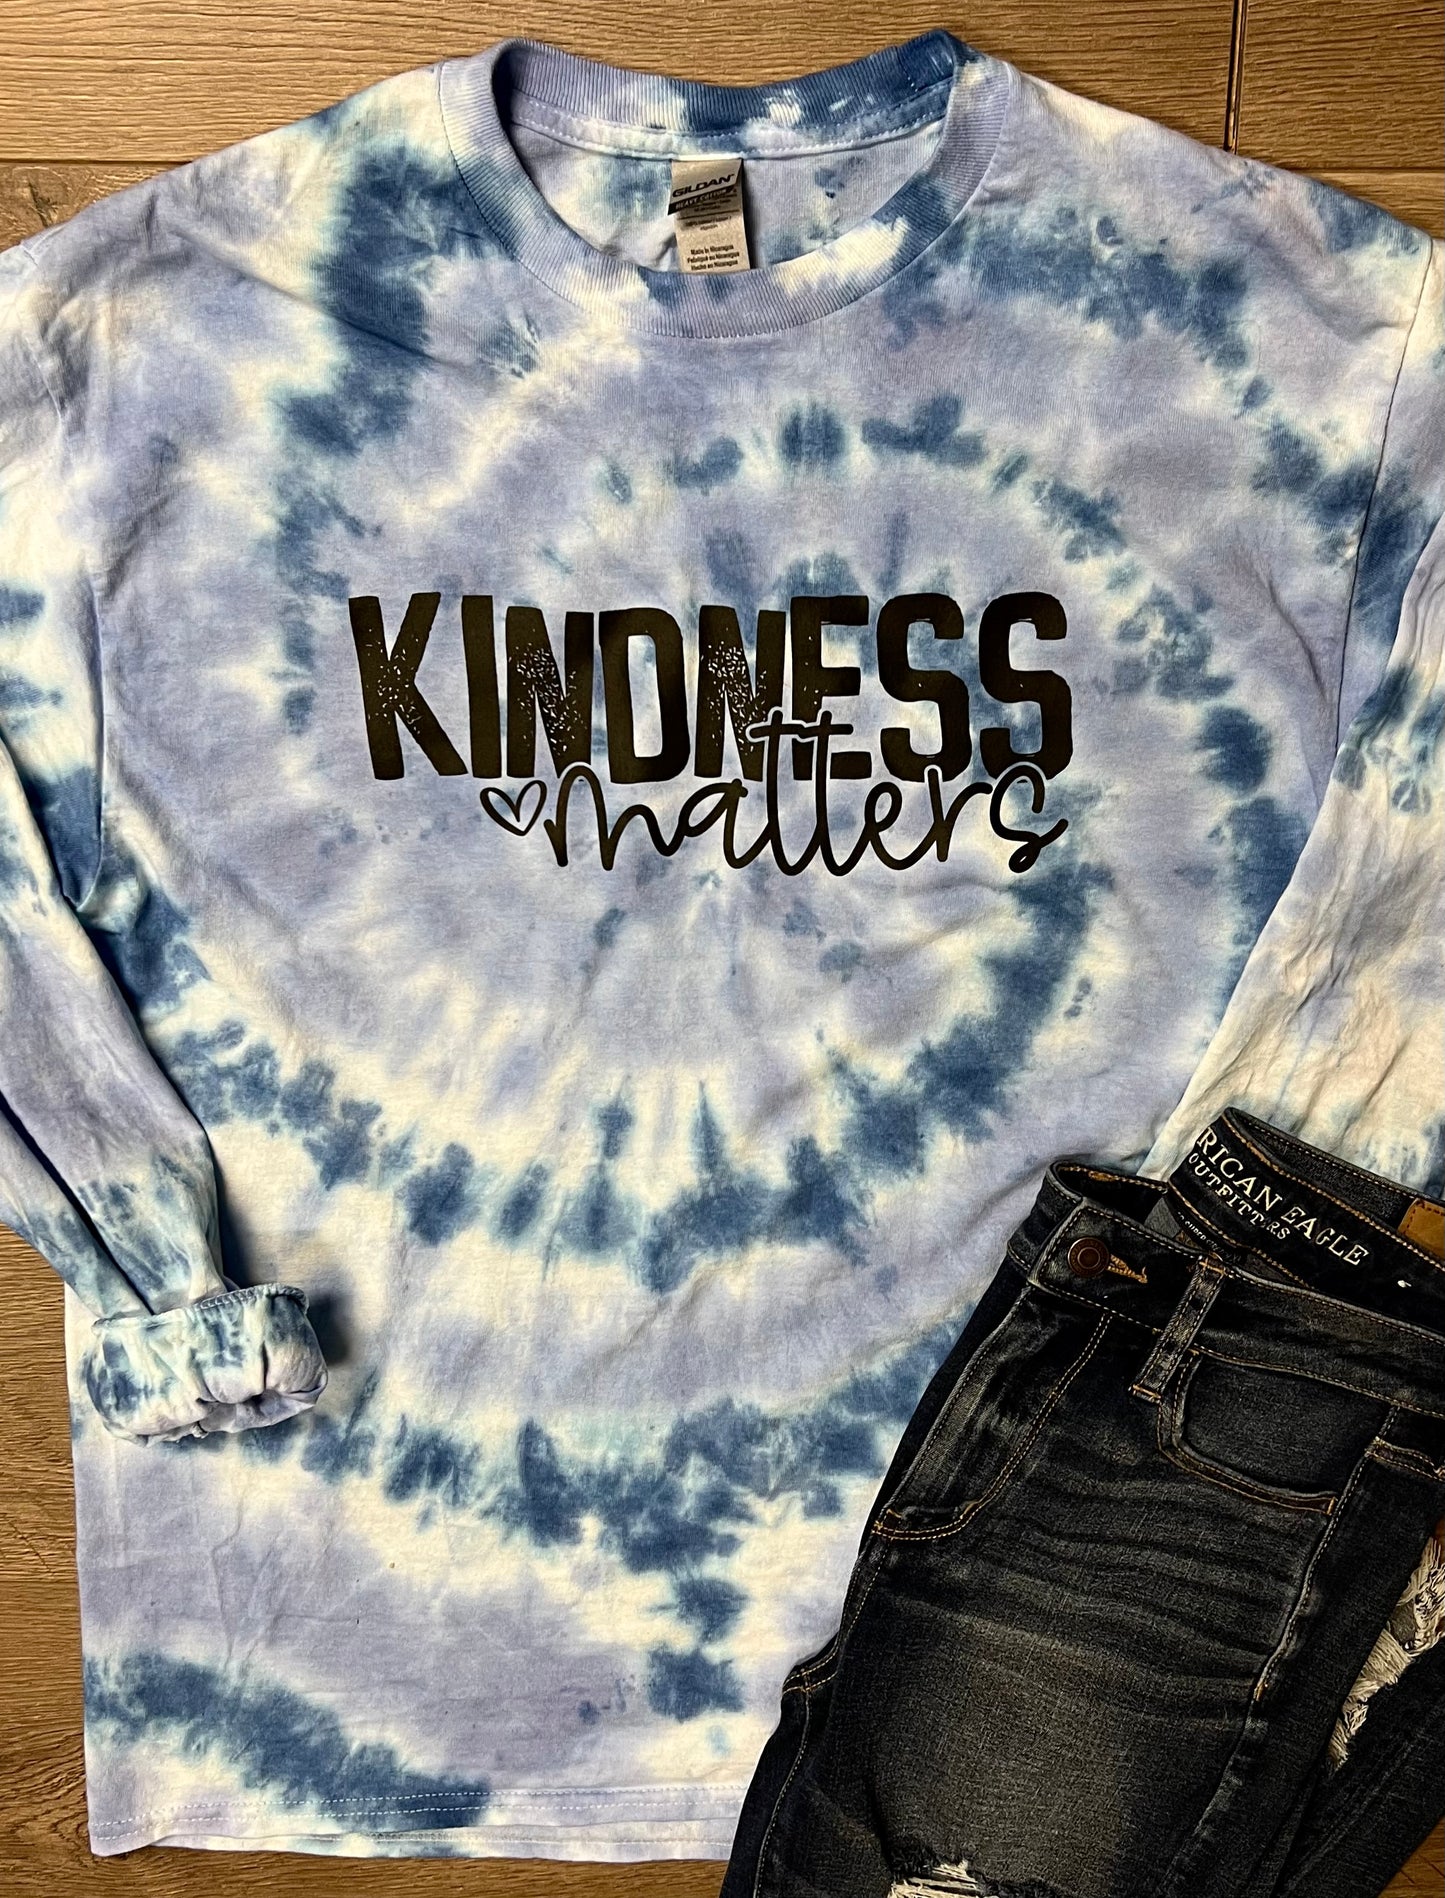 Hand-dyed Adult Kindness Matters Long-Sleeve T-shirt - CHOOSE TIE DYE COLORS